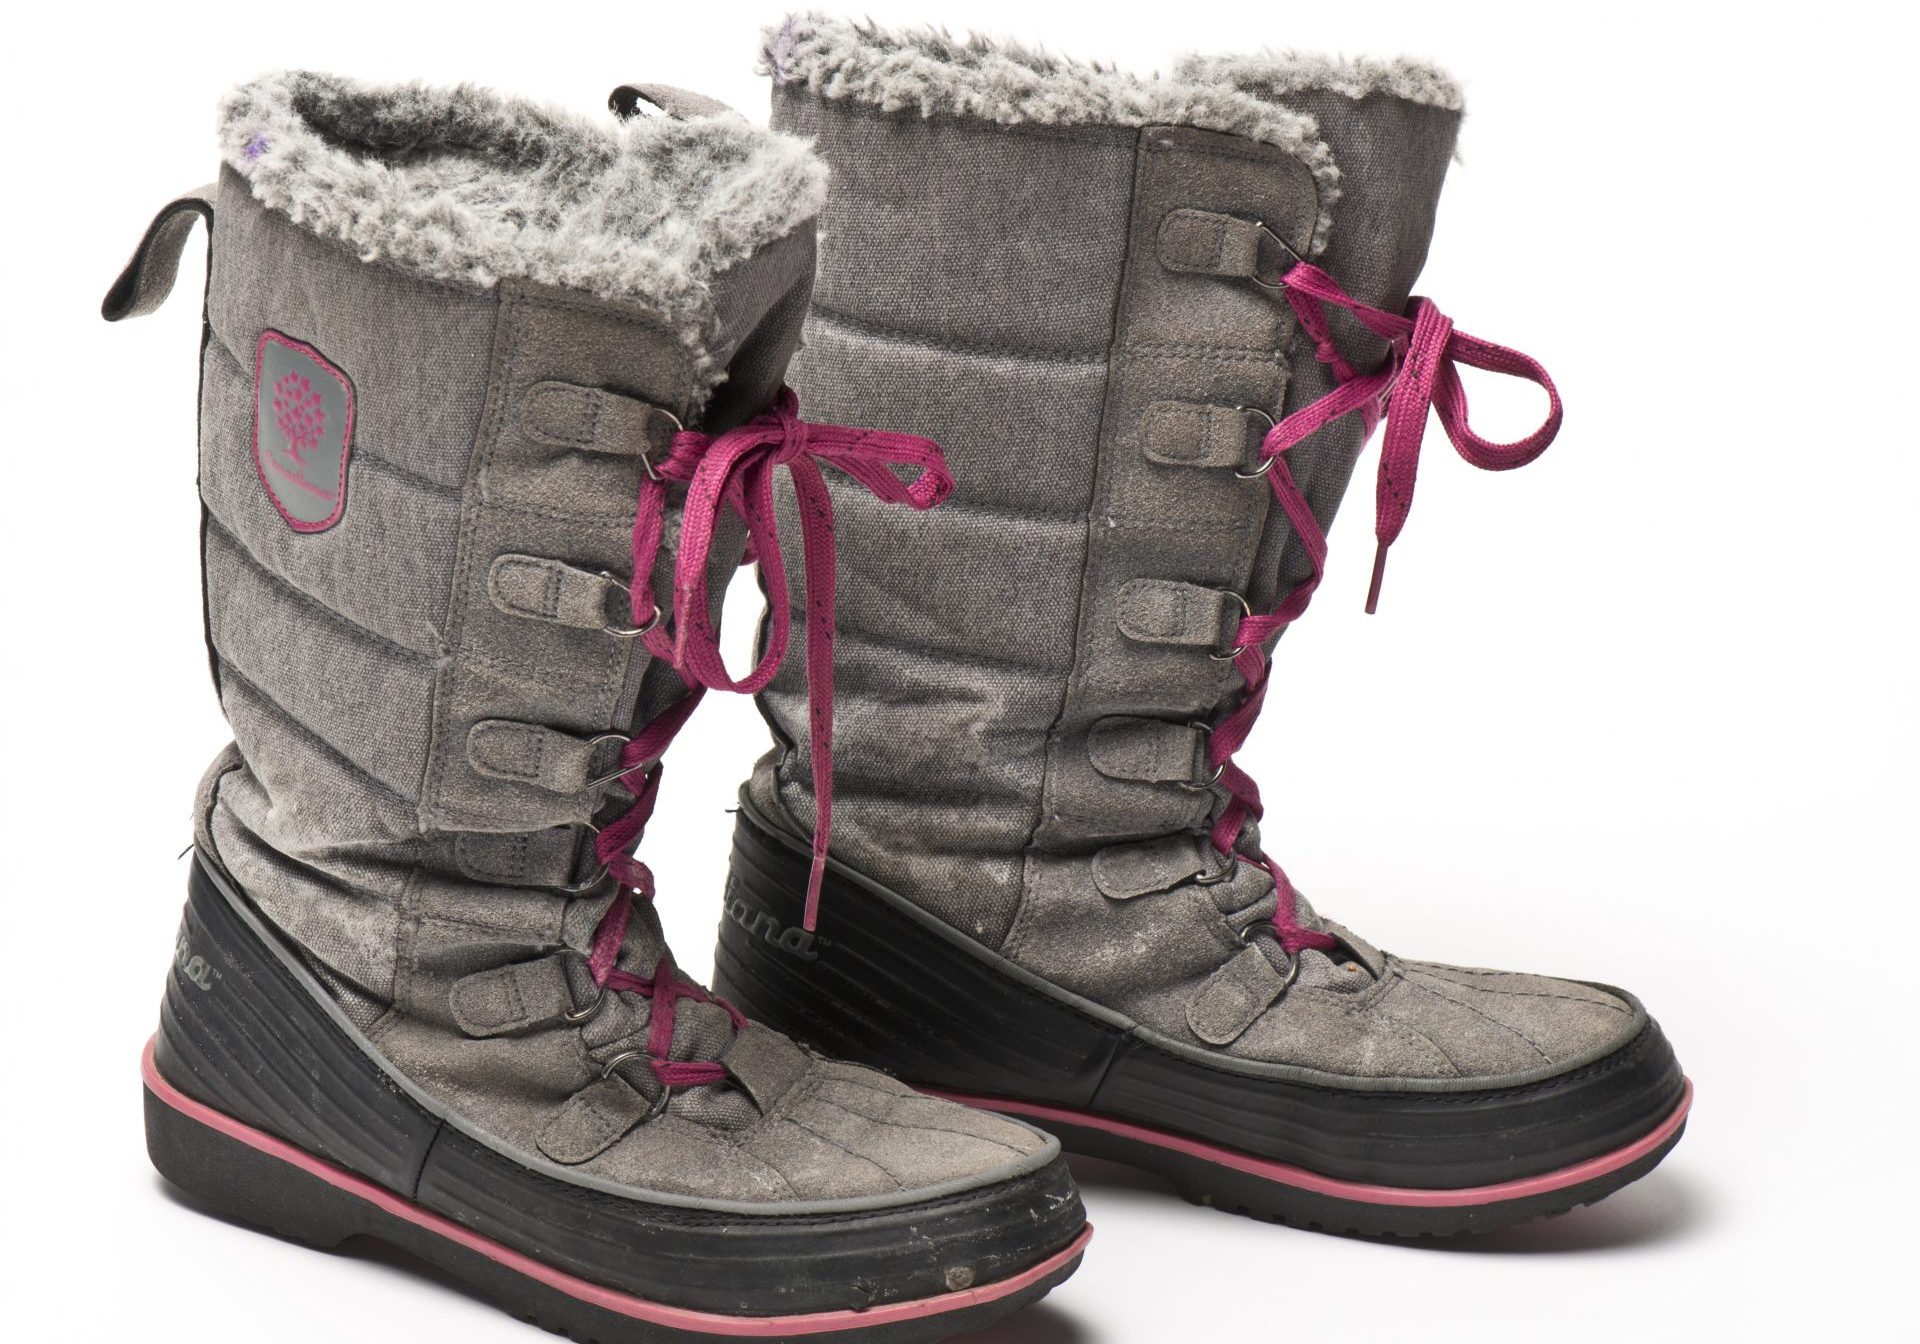 These Boots Are Made for Walking in the Snow_Yannis Lobaina_#200